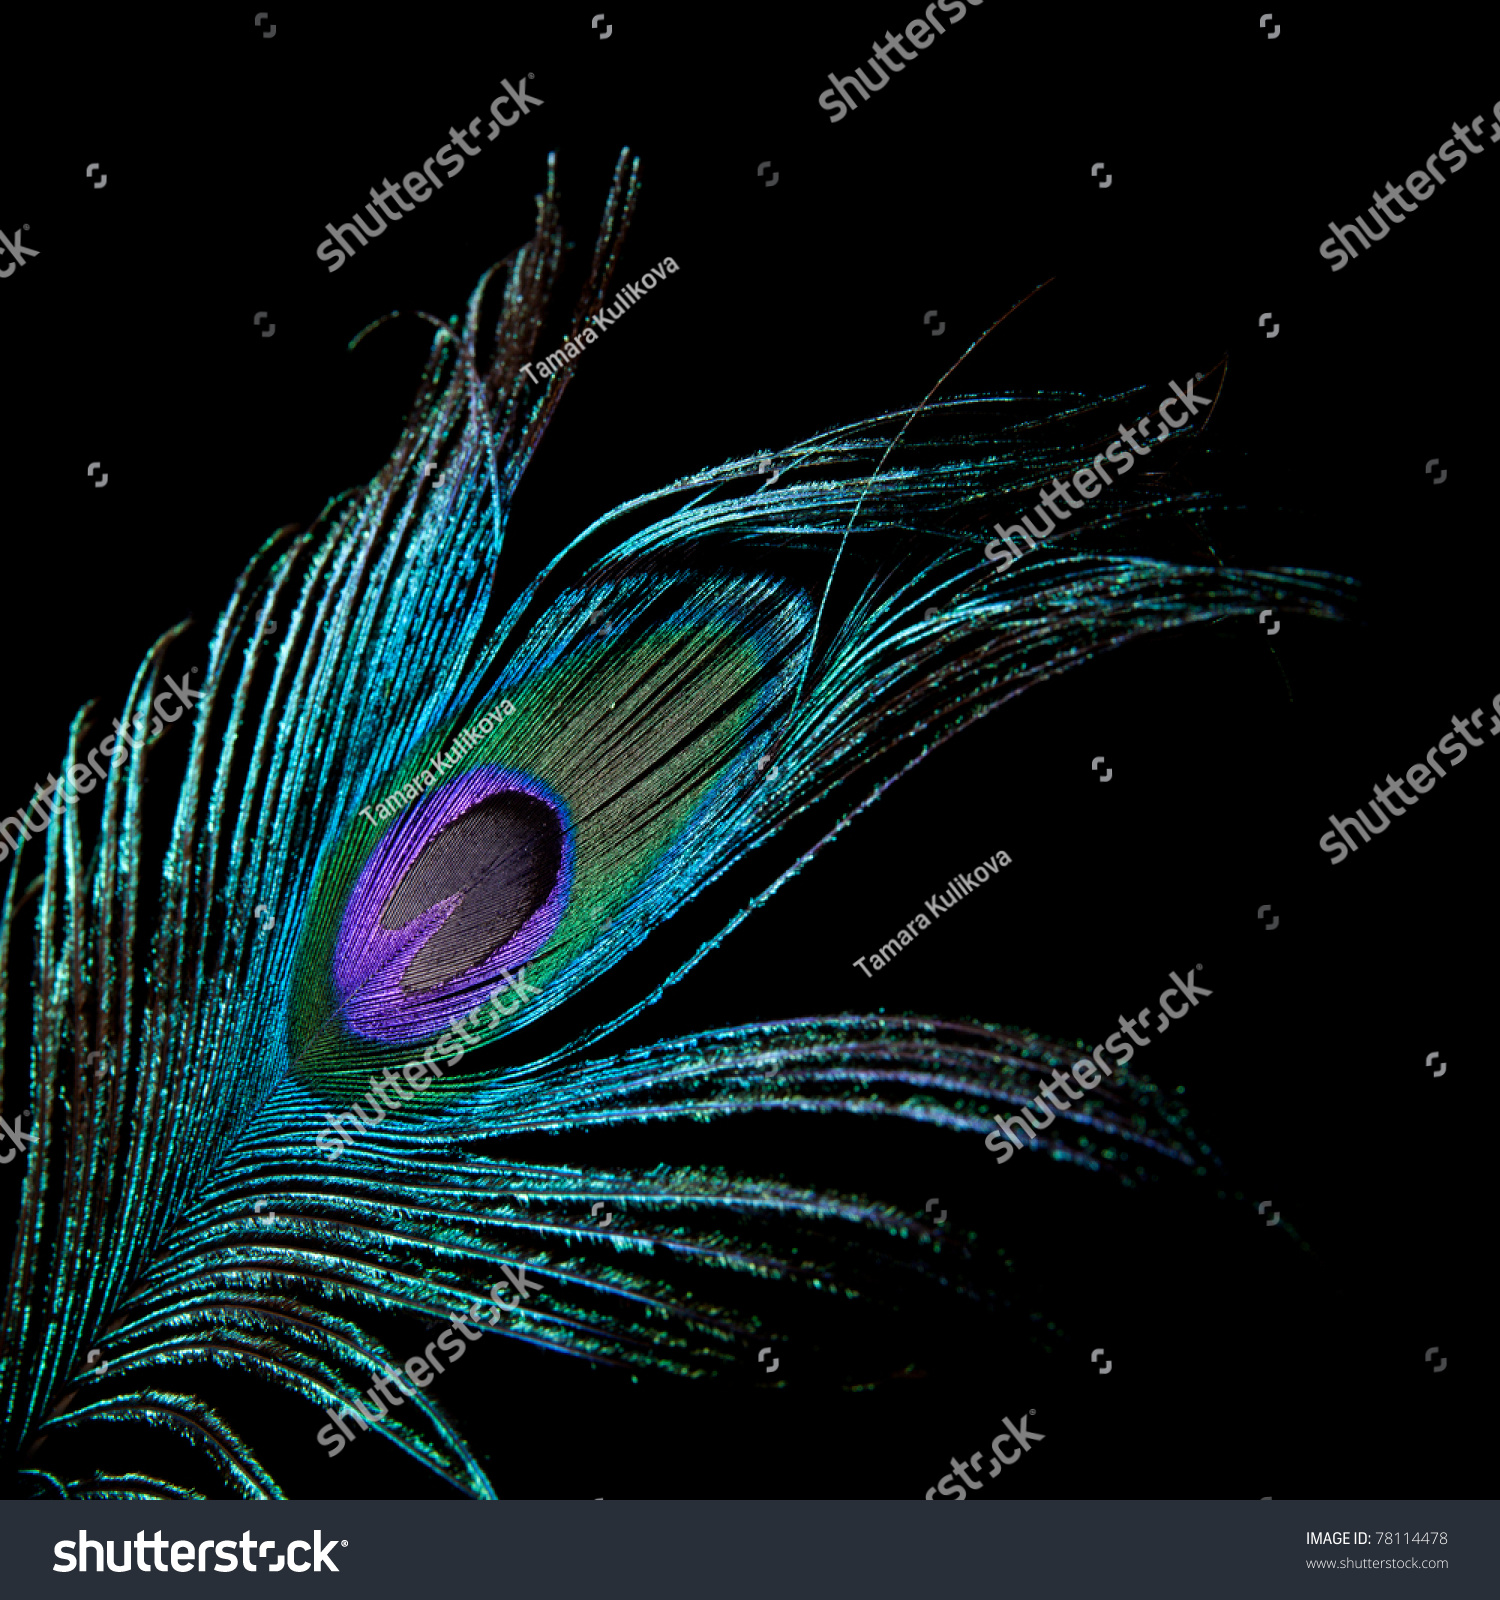 Peacock Feather Stock Photo 78114478 : Shutterstock